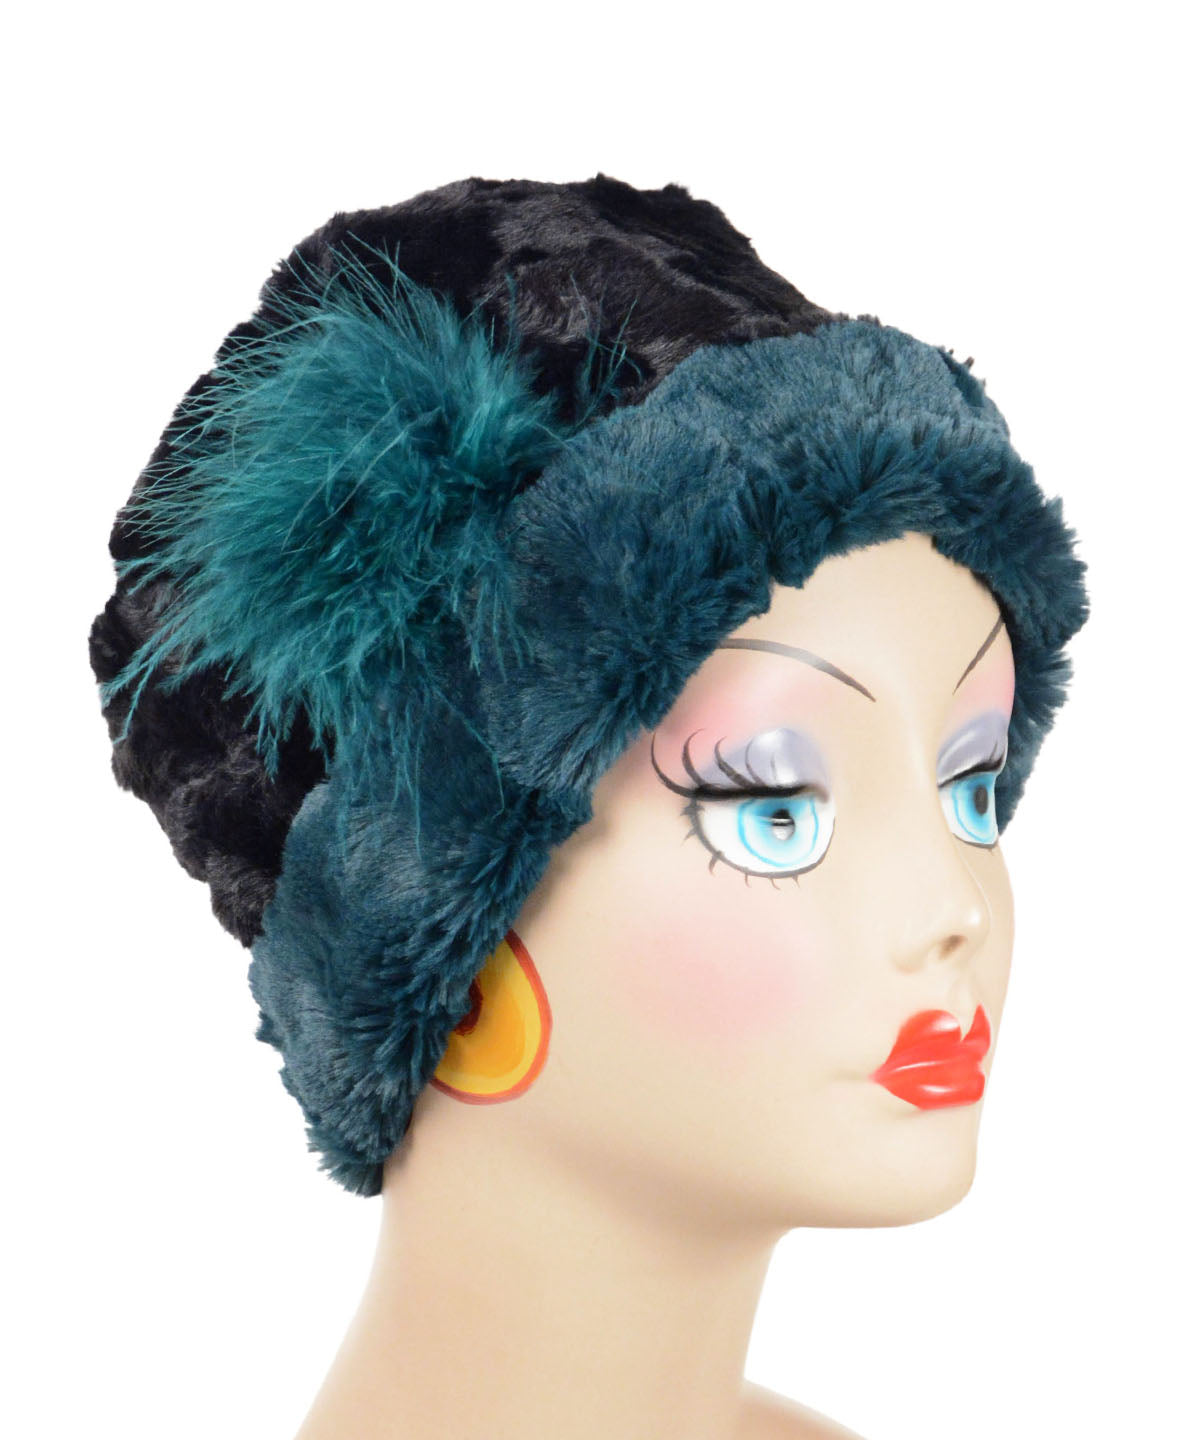 Cuffed Pillbox, Reversible Peacock Pond with Cuddly Black Faux Fur By Pandemonium Millinery. Hat features a Turquoise Ostrich feather brooch. Handmade in Seattle, WA USA.